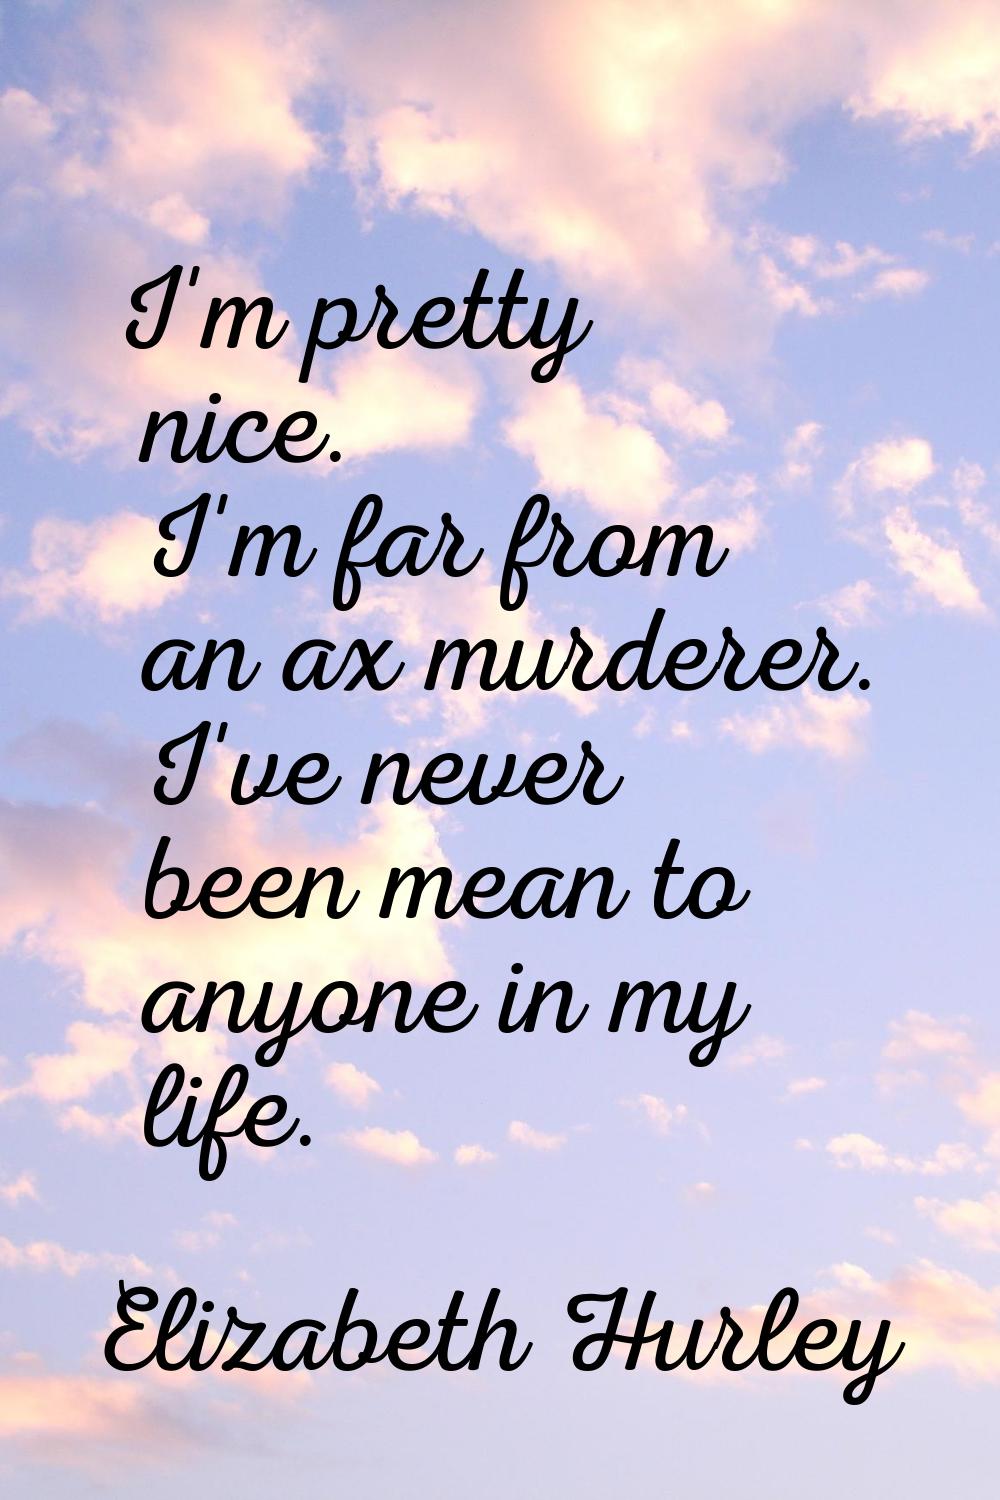 I'm pretty nice. I'm far from an ax murderer. I've never been mean to anyone in my life.